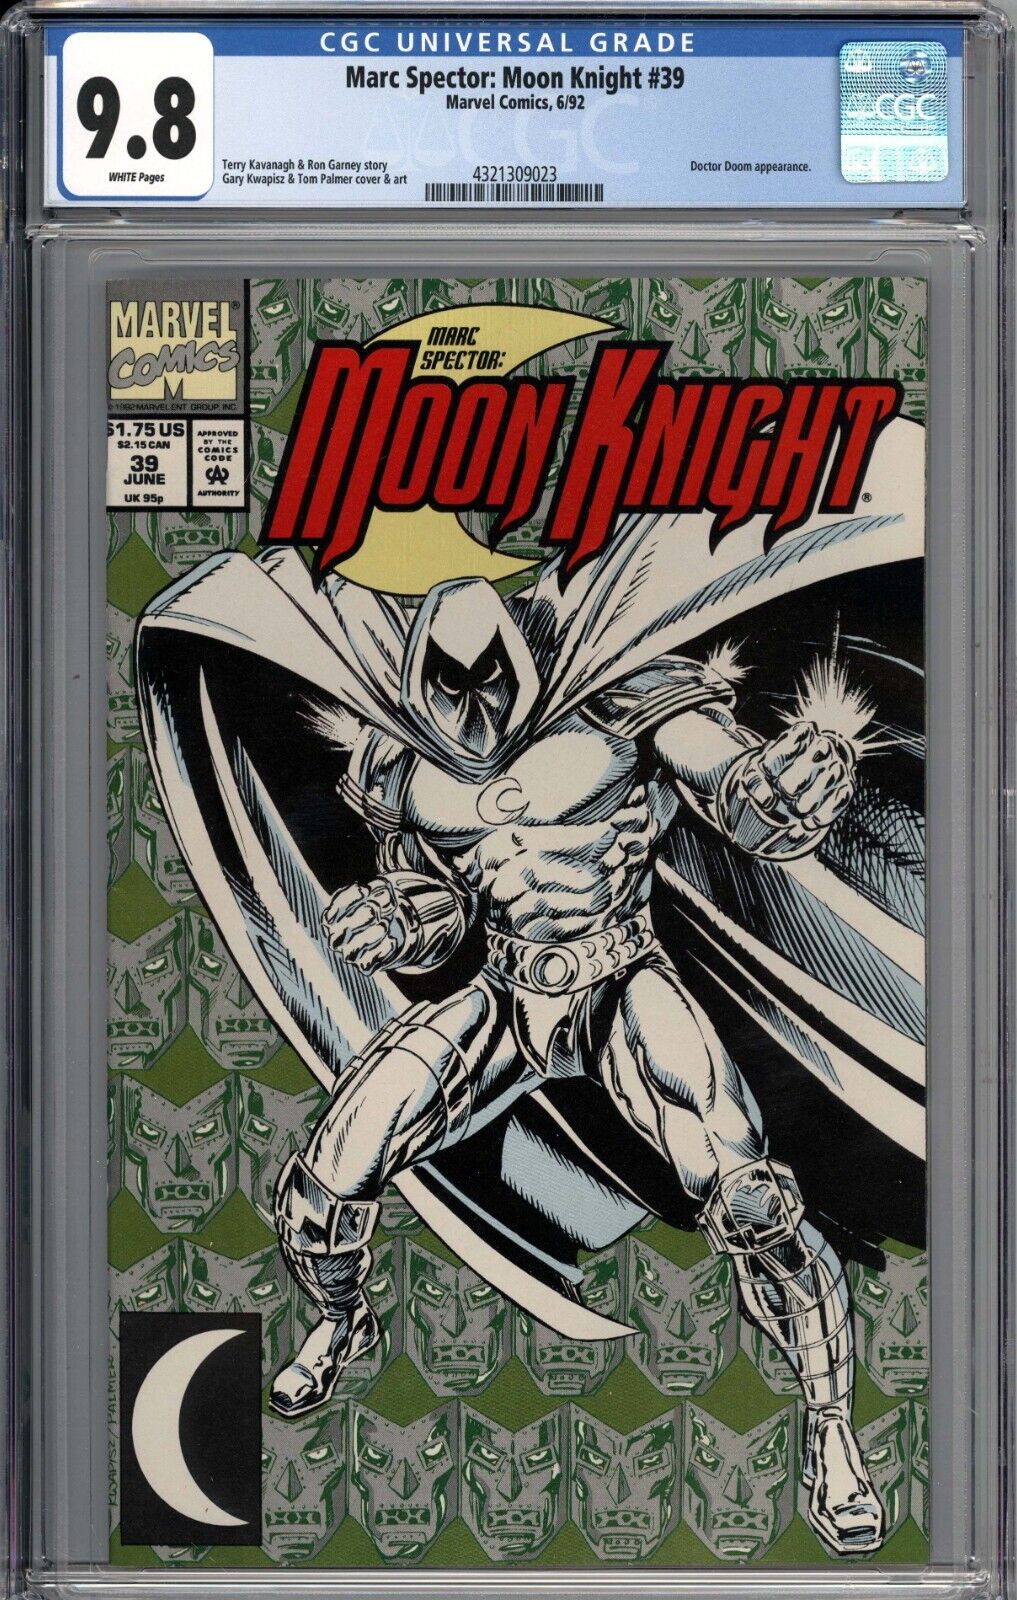 Marc Spector: Moon Knight #39 CGC 9.8 NM/MT Doctor Doom Appearance WHITE PAGES